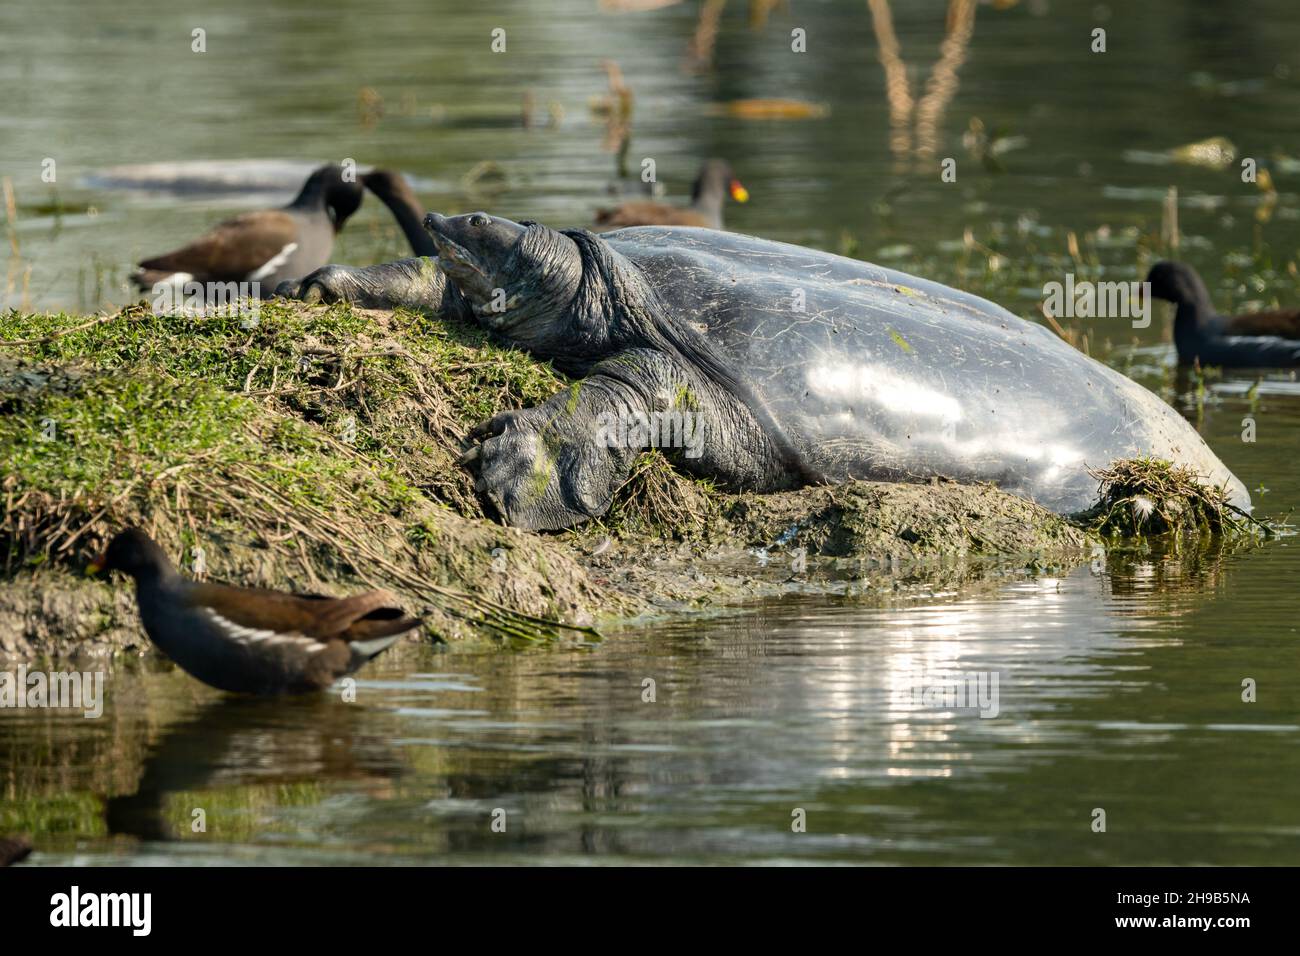 Indian softshell or Ganges softshell turtle a vulnerable species portrait with reflection basking sun in winter season of keoladeo national park india Stock Photo